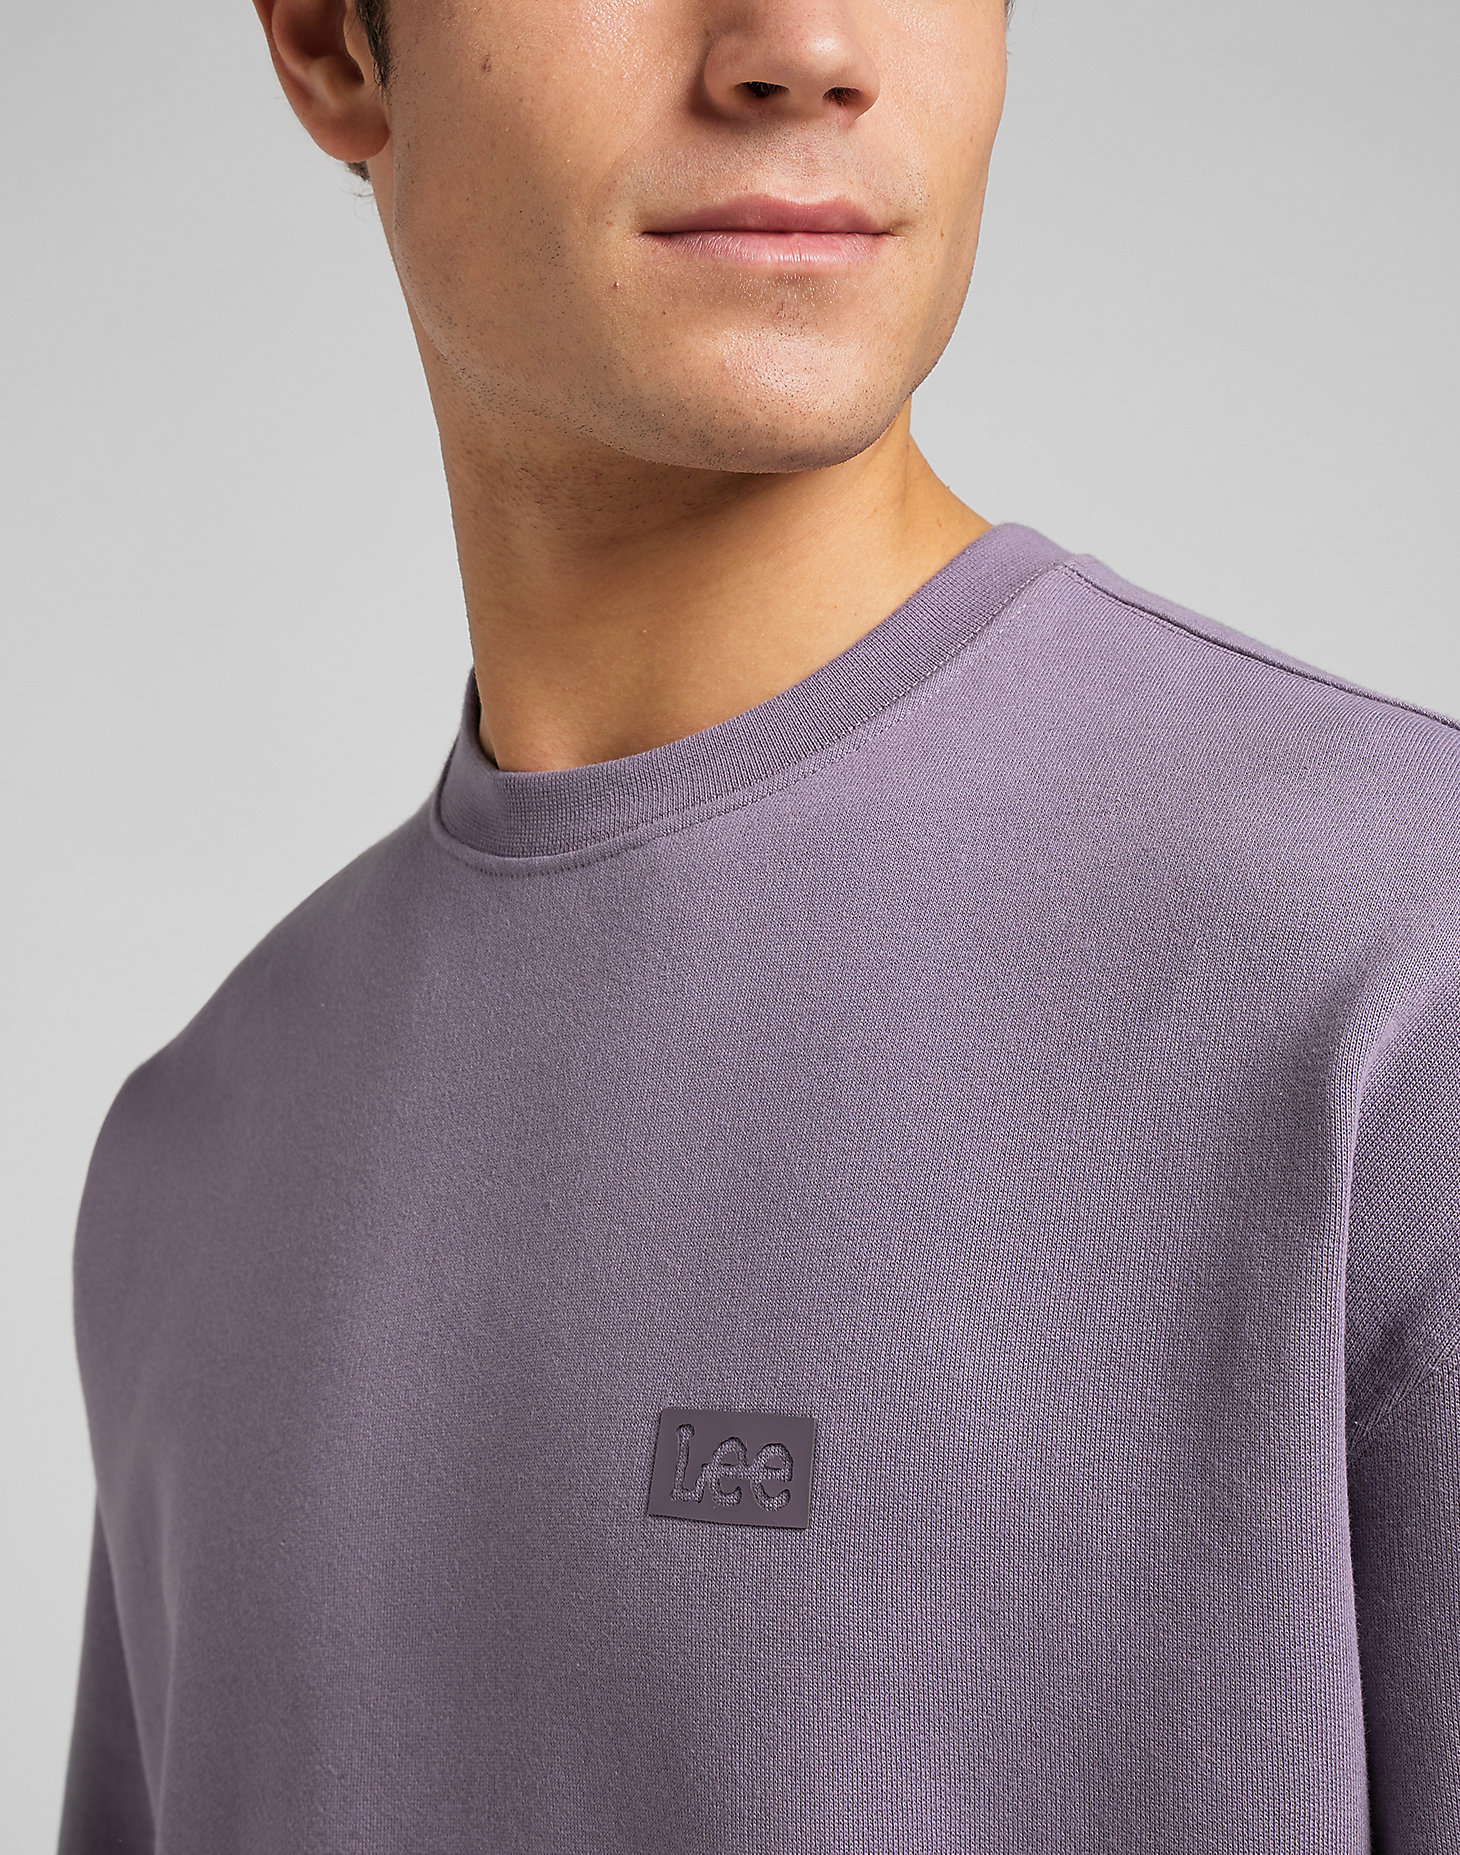 Core Loose Crew in Washed Purple alternative view 4